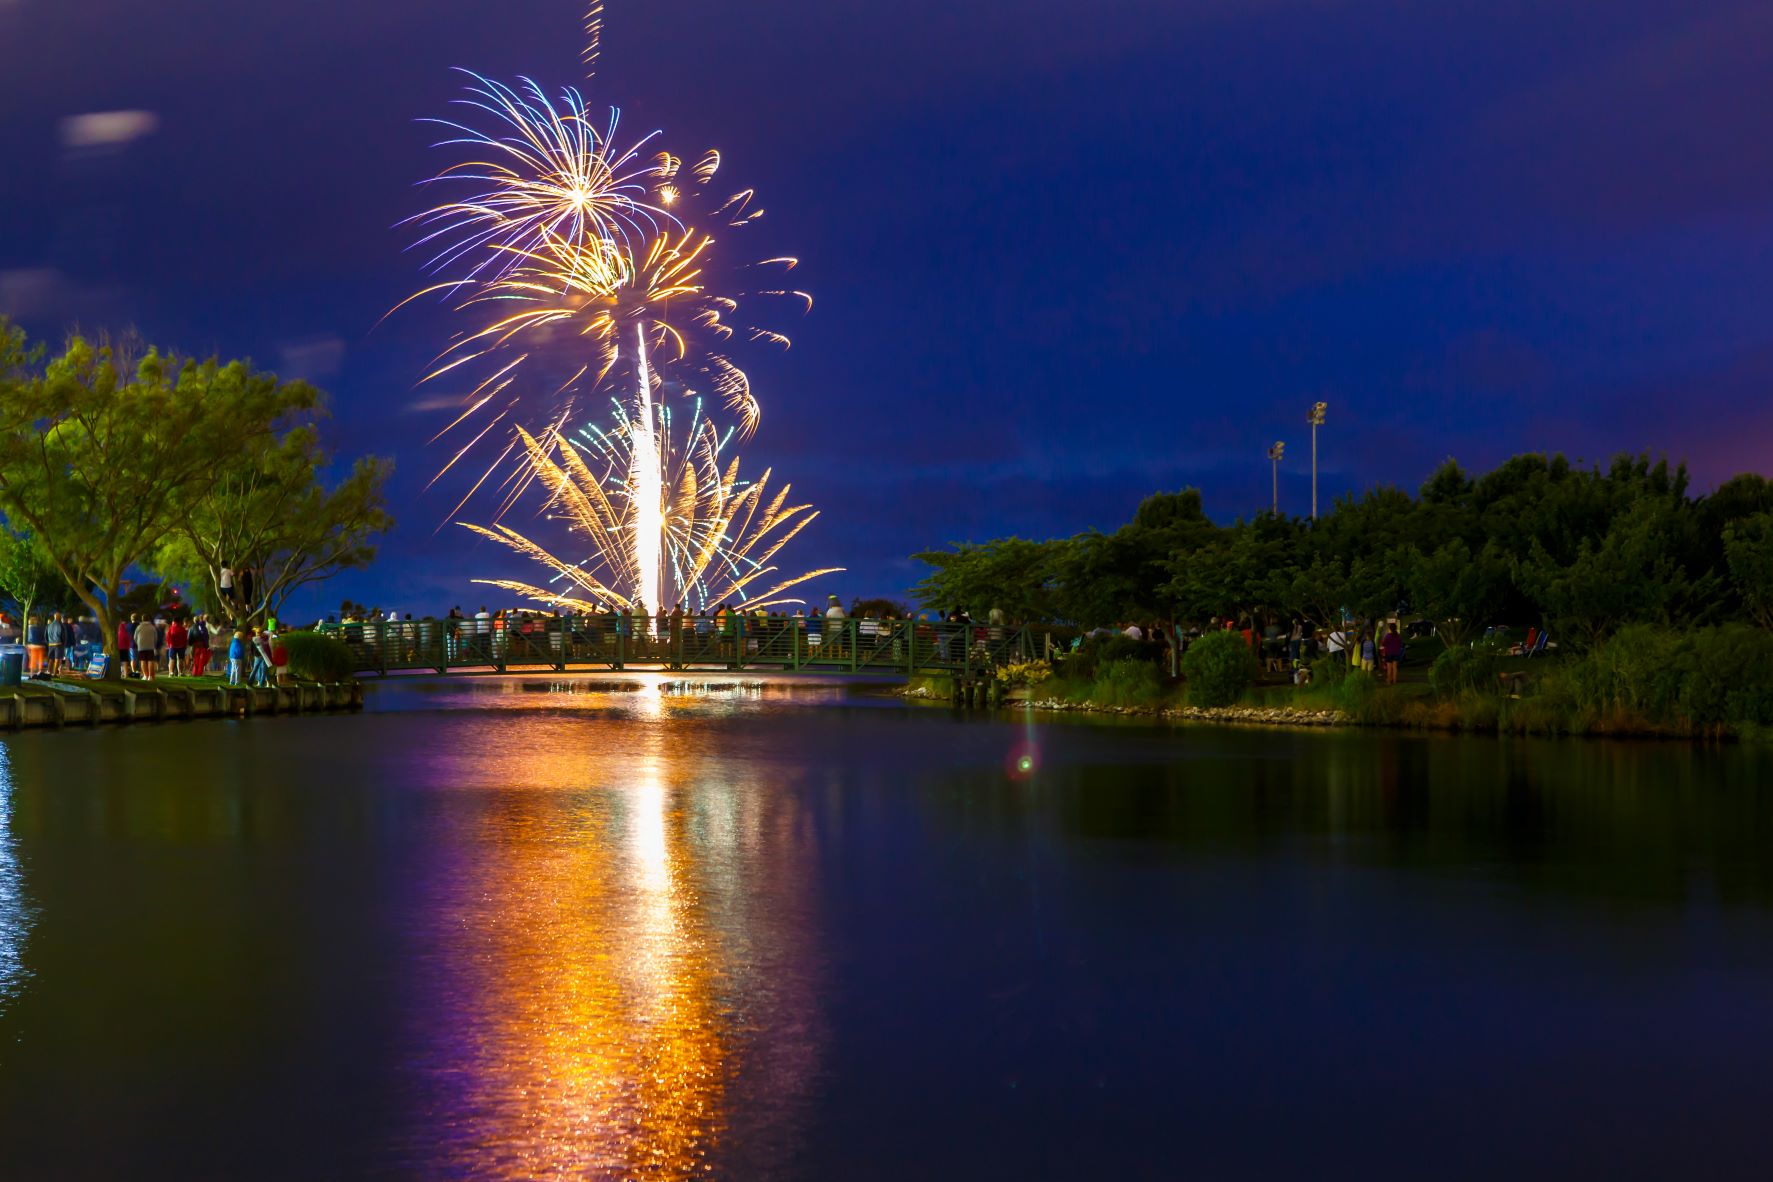 01/20/2022 | Fireworks To Return To Northside Park This Summer | News Ocean  City MD